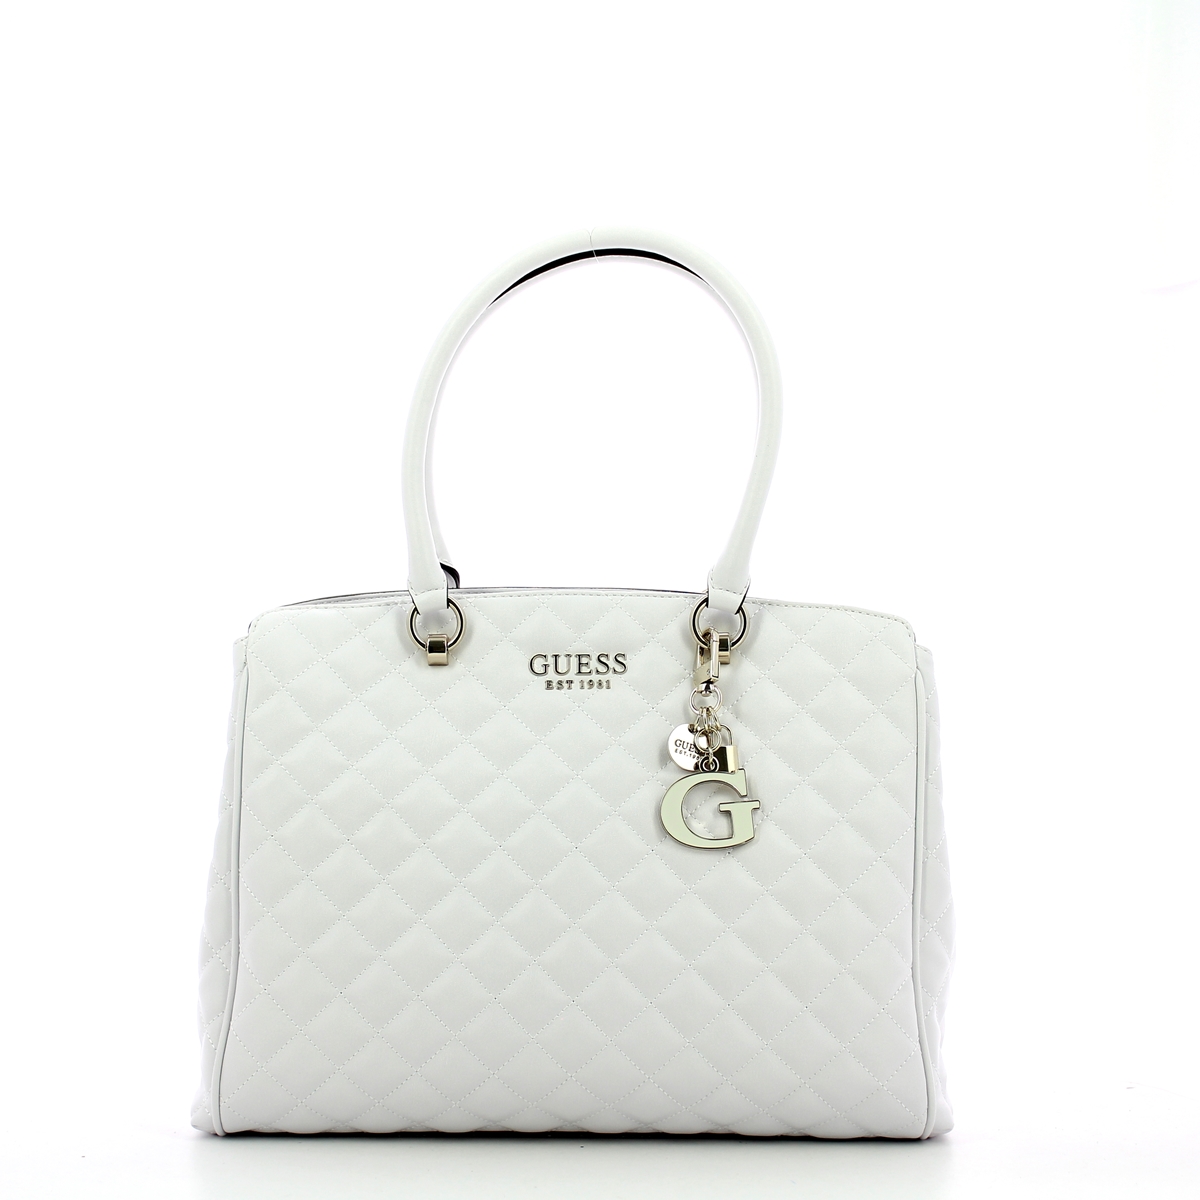 Quilted Carryall Melise Guess | Bagalier.com